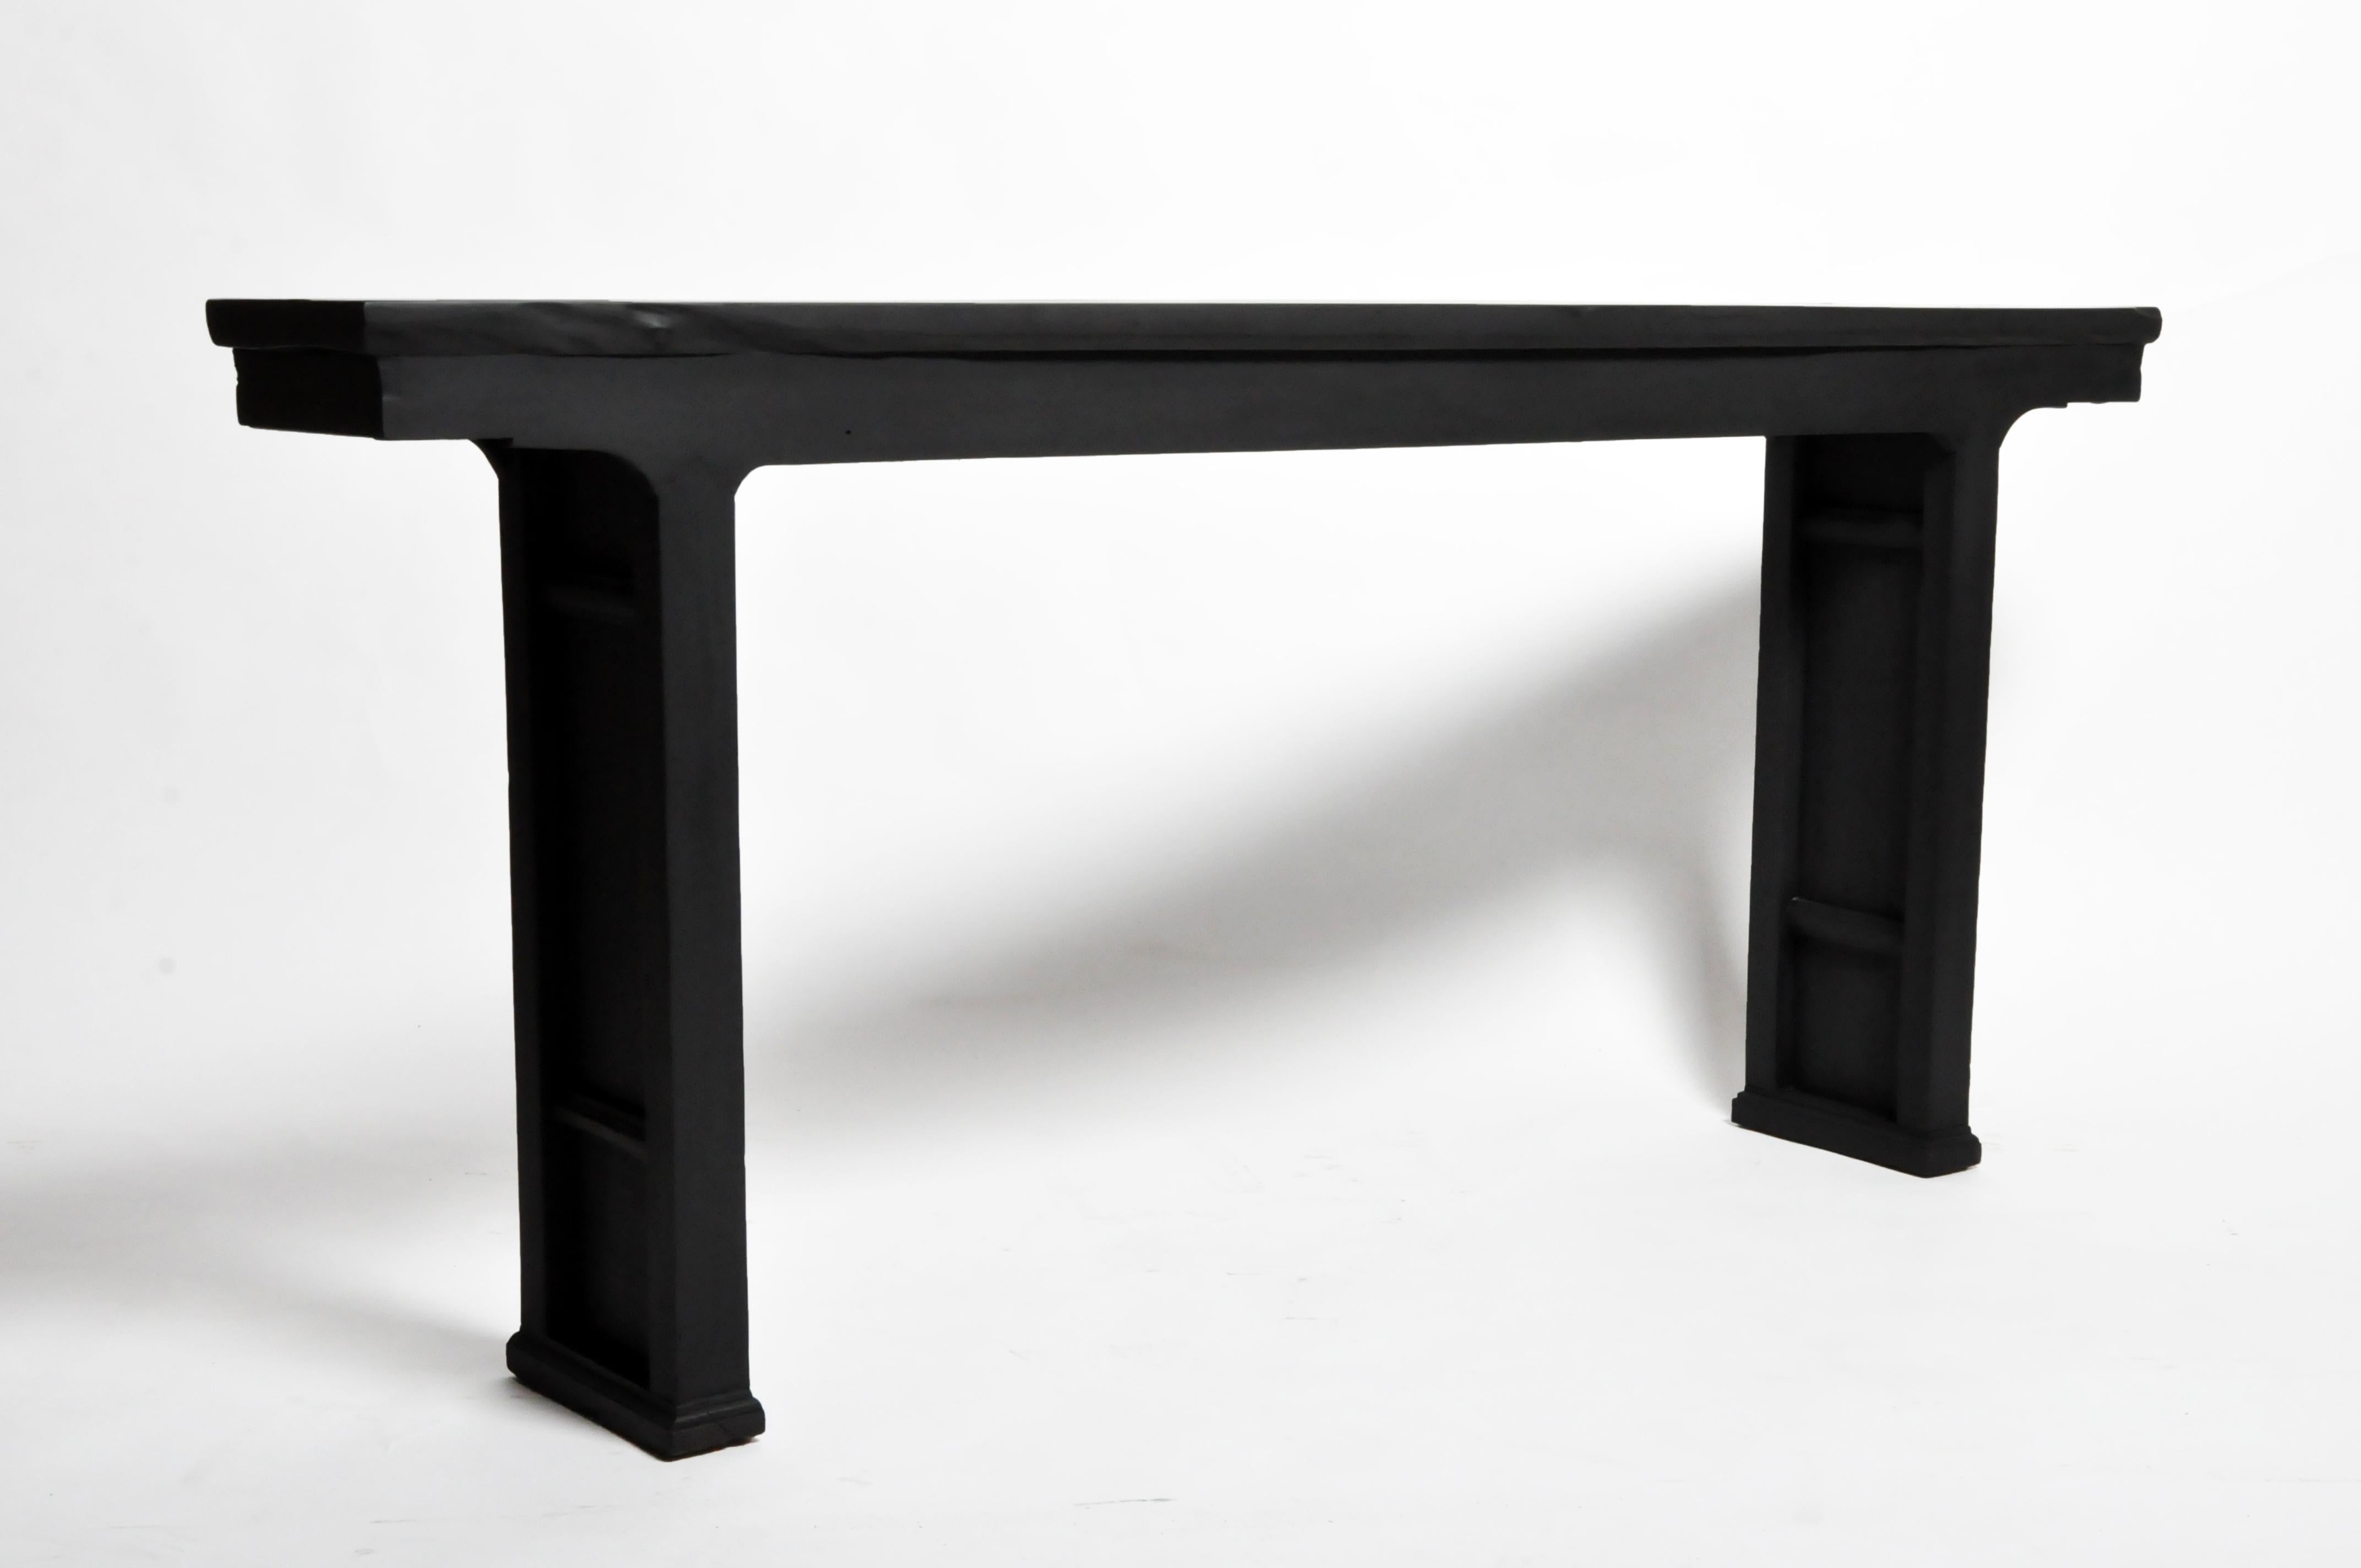 This slim and elegant Northern Chinese table is made from elm and peach woods and dates to the 19th century. It has been extensively refinished as its original finish had already been altered. The new finish is a multi-layered black paint with a